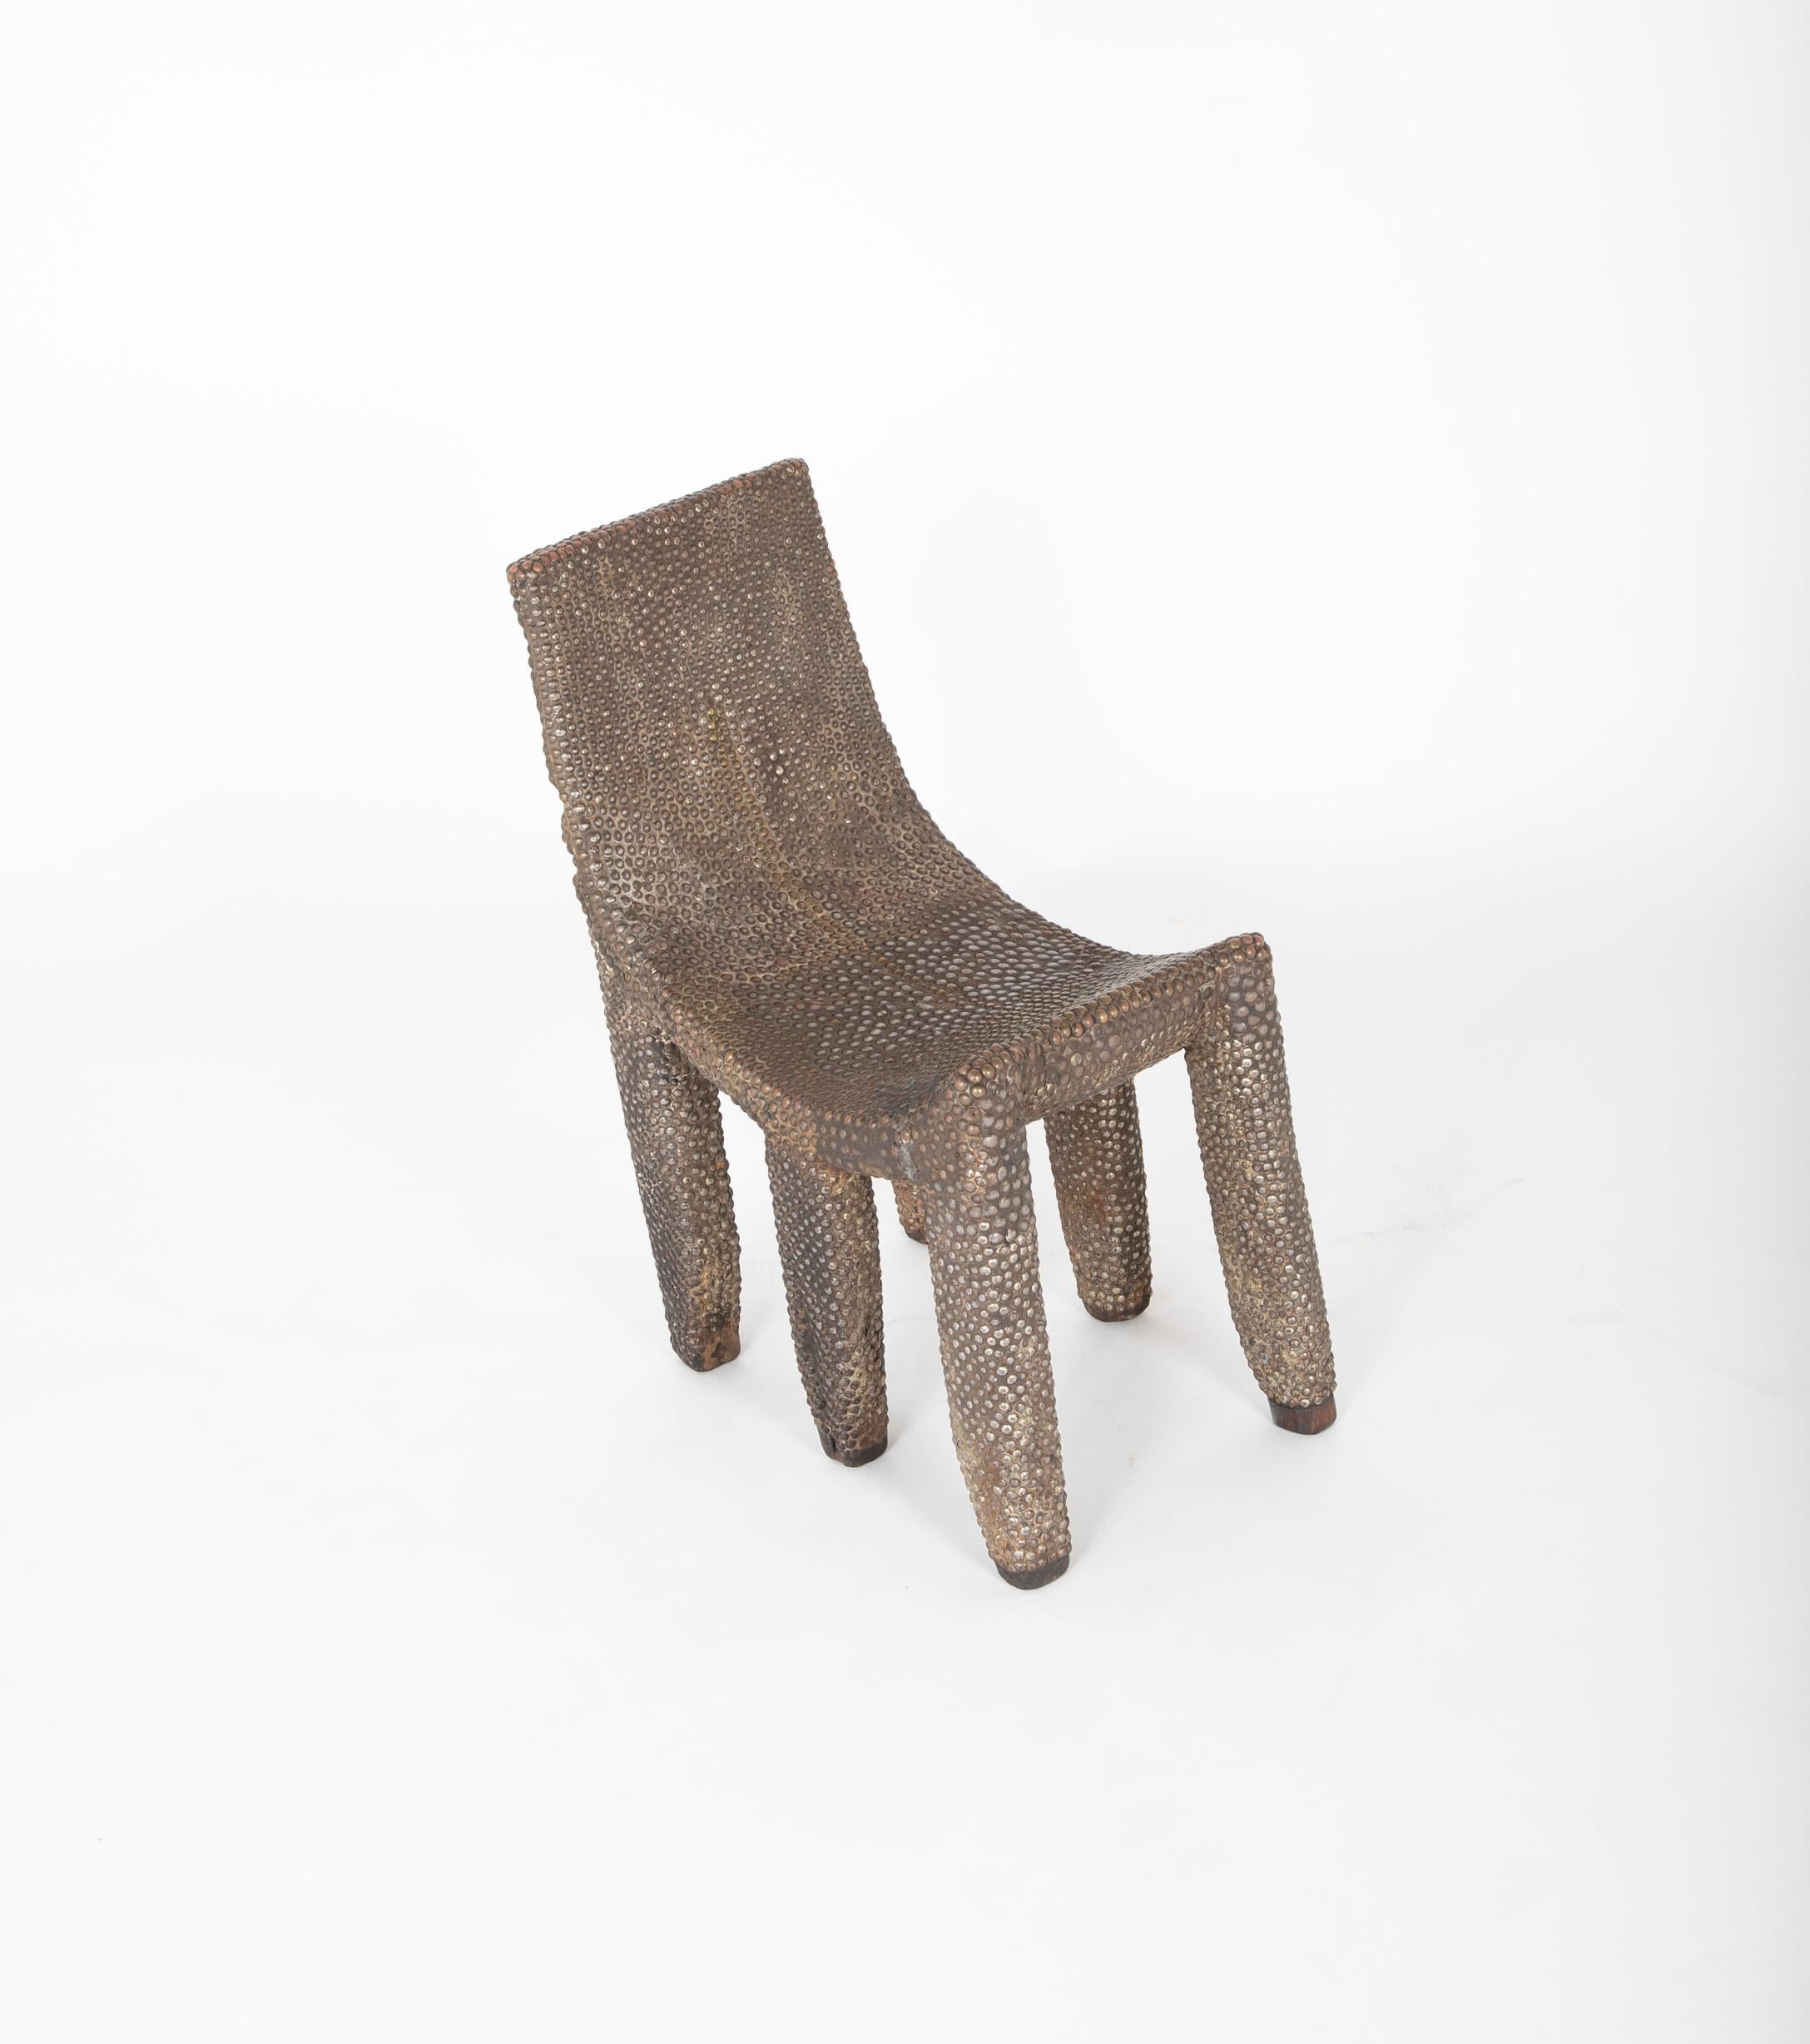 Late 19th century African Ngombe studded chair from the area of Gabon & Zaire. Previously property of Merton D. Simpson Gallery.